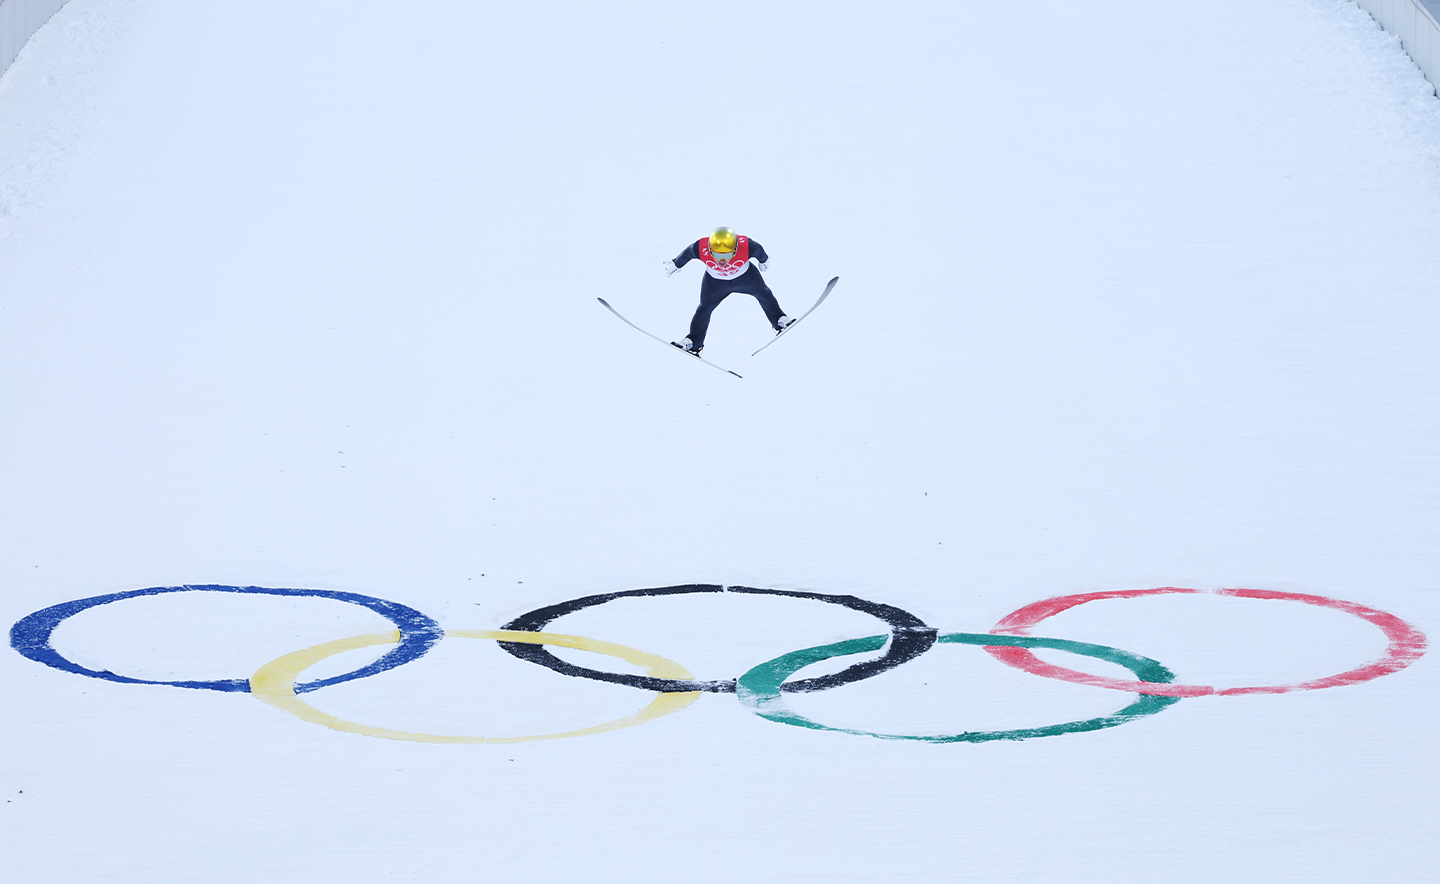 ZHANGJIAKOU, CHINA - FEBRUARY 15: Manuel Faisst of Team Germany competes during Individual Gundersen Large Hill/10km, Ski Jumping Competition Round on day 11 of 2022 Beijing Winter Olympics at The National Cross-Country Skiing Centre on February 15, 2022 in Zhangjiakou, China. (Photo by Lars Baron/Getty Images)